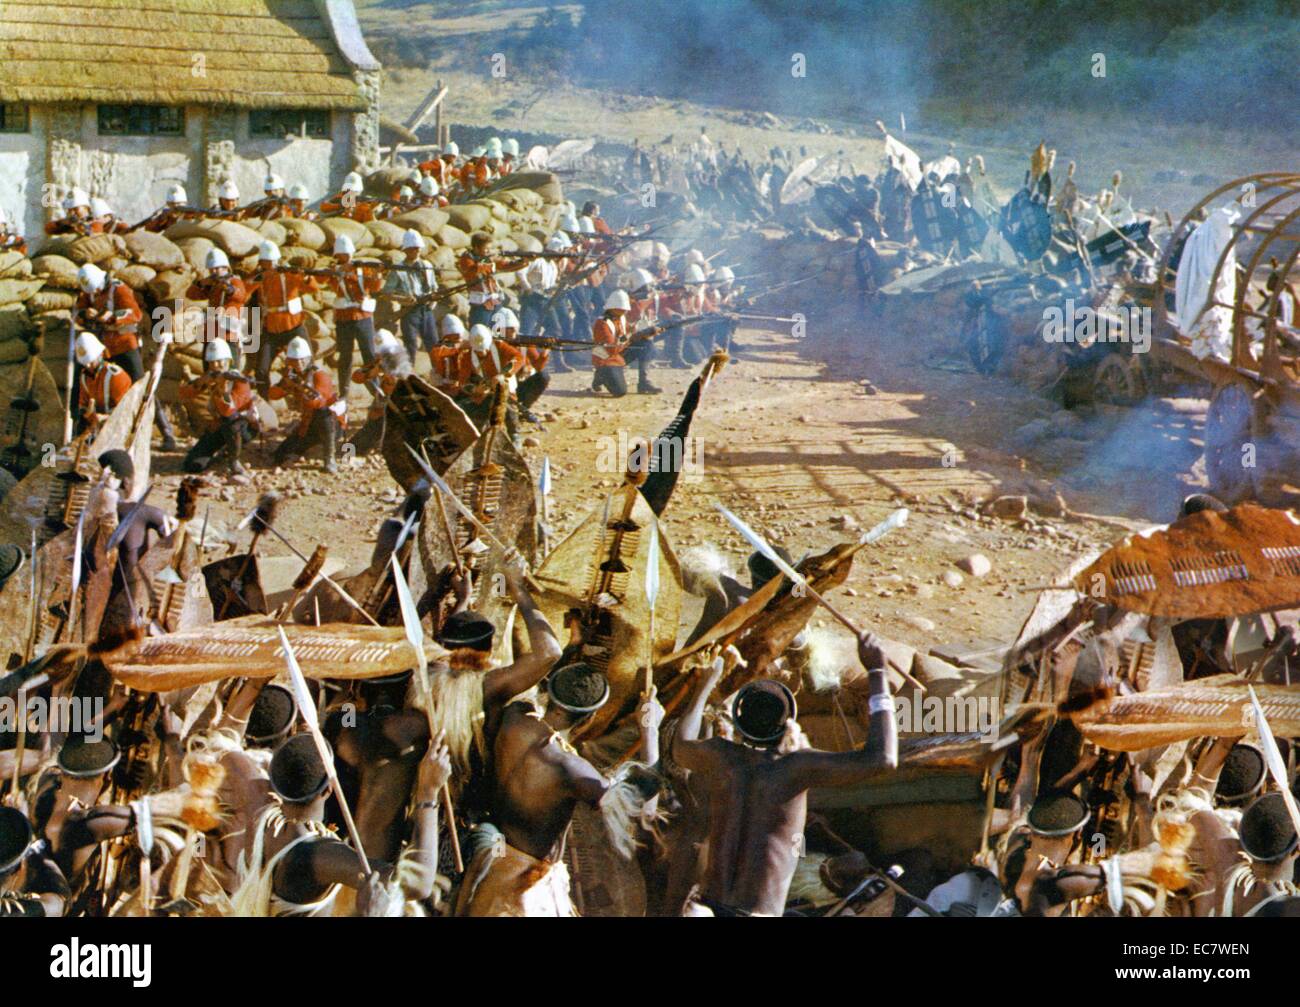 Zulu is a 1964 historical war film depicting the Battle of Rorke's Drift between the British Army and the Zulus in January 1879, during the Anglo-Zulu War. The film was directed by blacklisted American screenwriter Cy Endfield and starred Michael Caine and Stanley Baker. Stock Photo